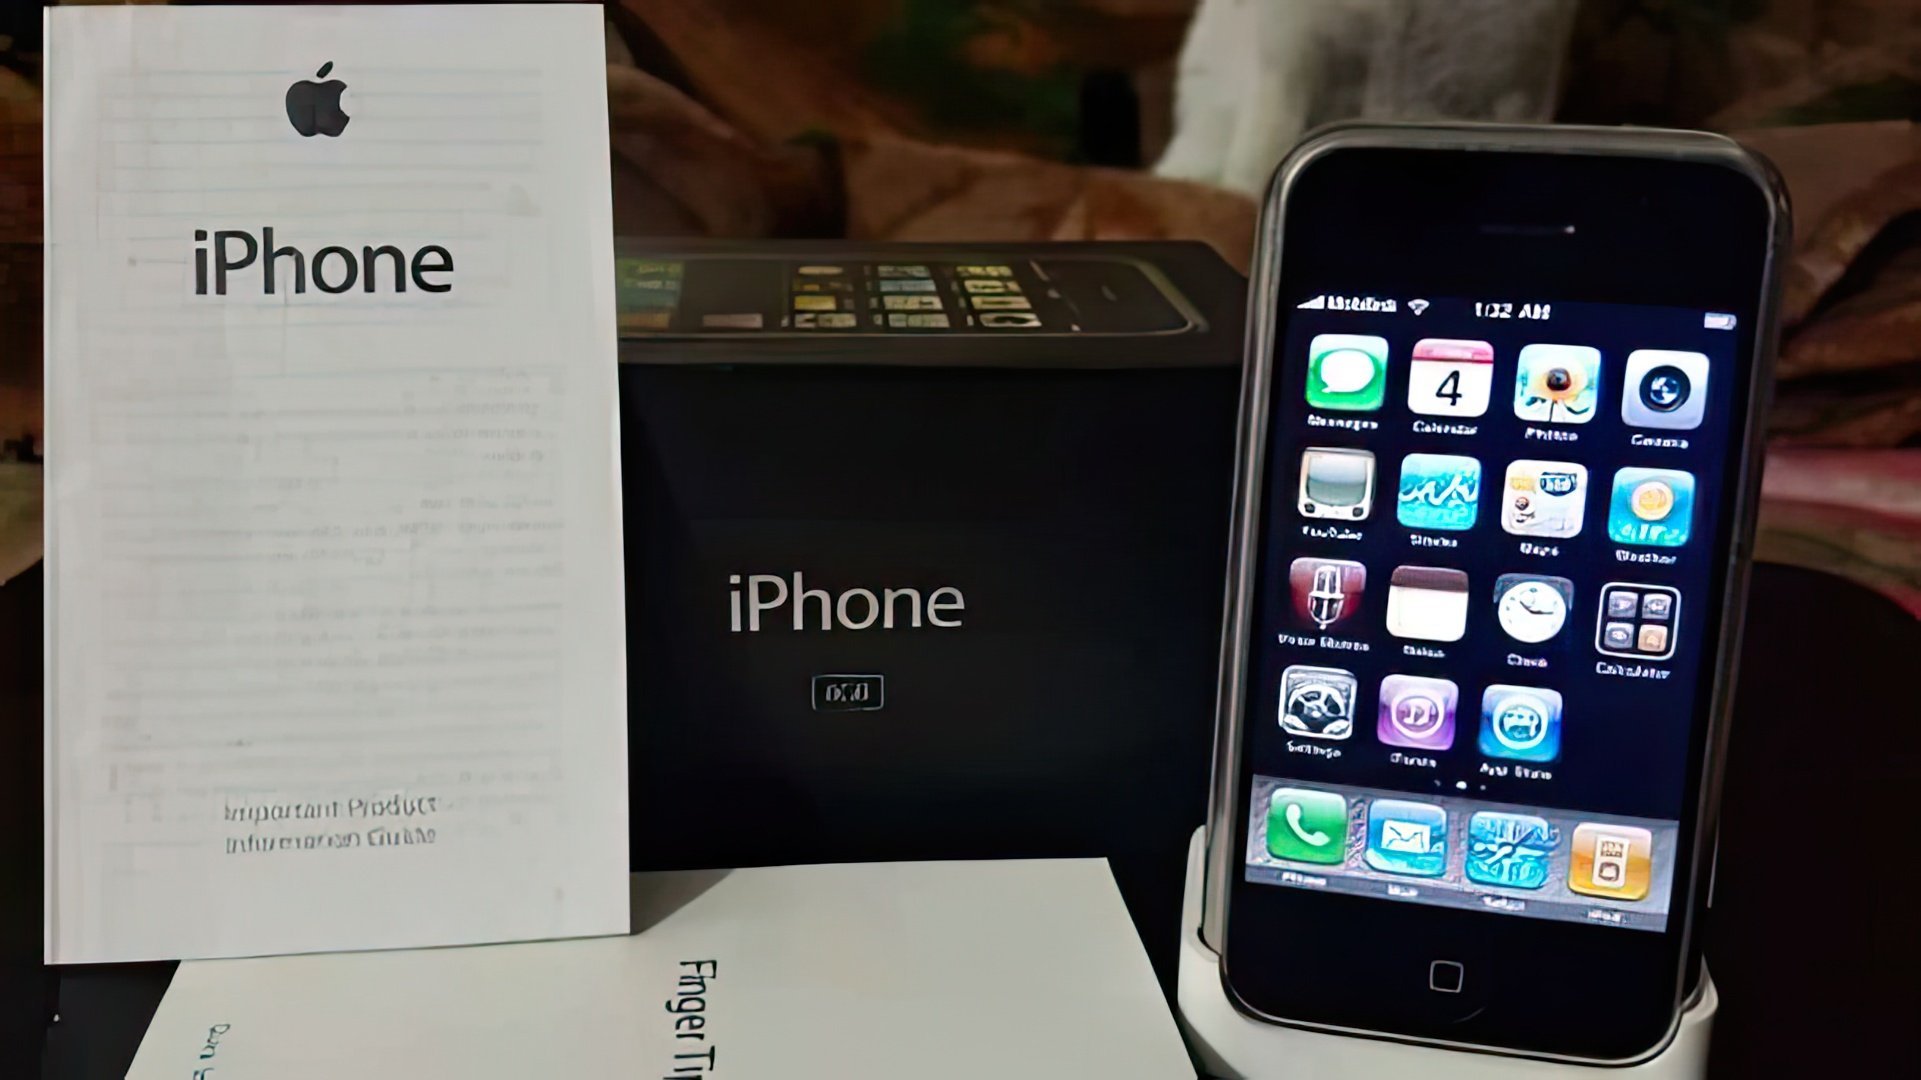 The first iPhone appeared in stores in the summer of 2007